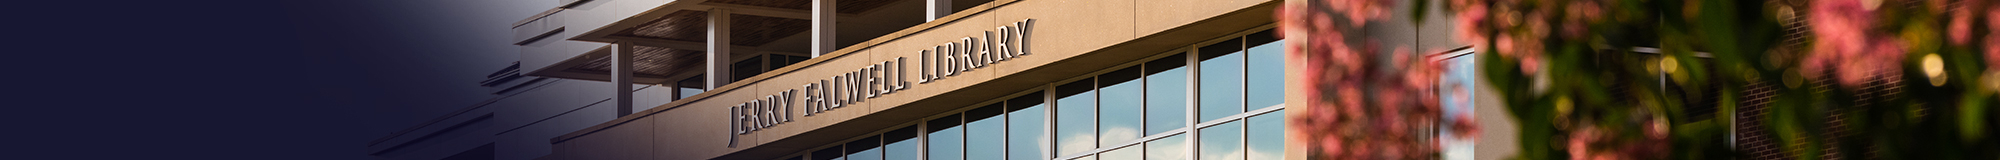 Photo of front of library